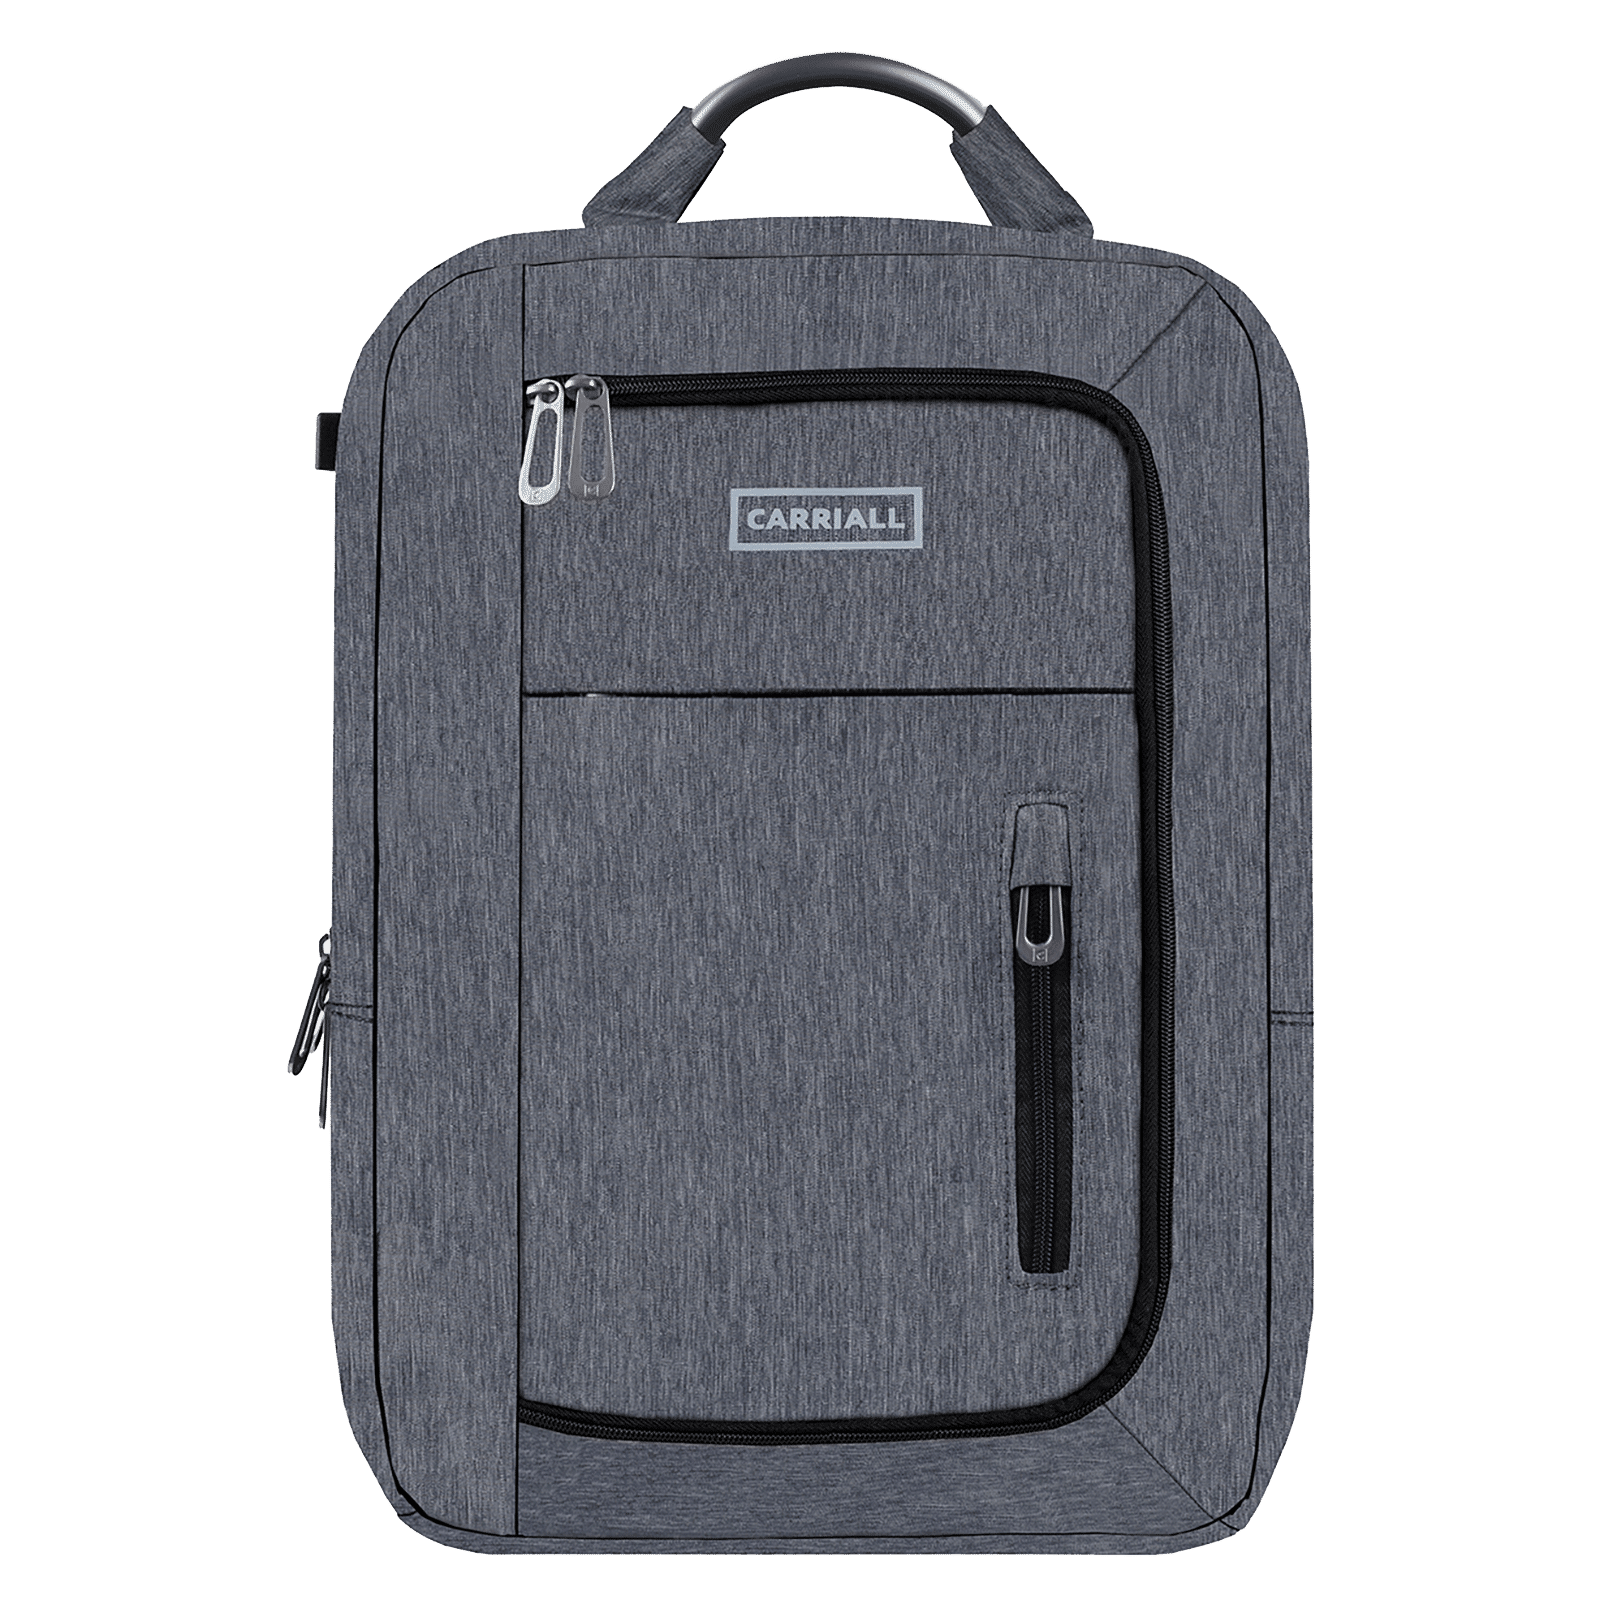 Top Croma Laptop Bag Dealers in Indore - Best Croma Laptop Bag Dealers -  Justdial